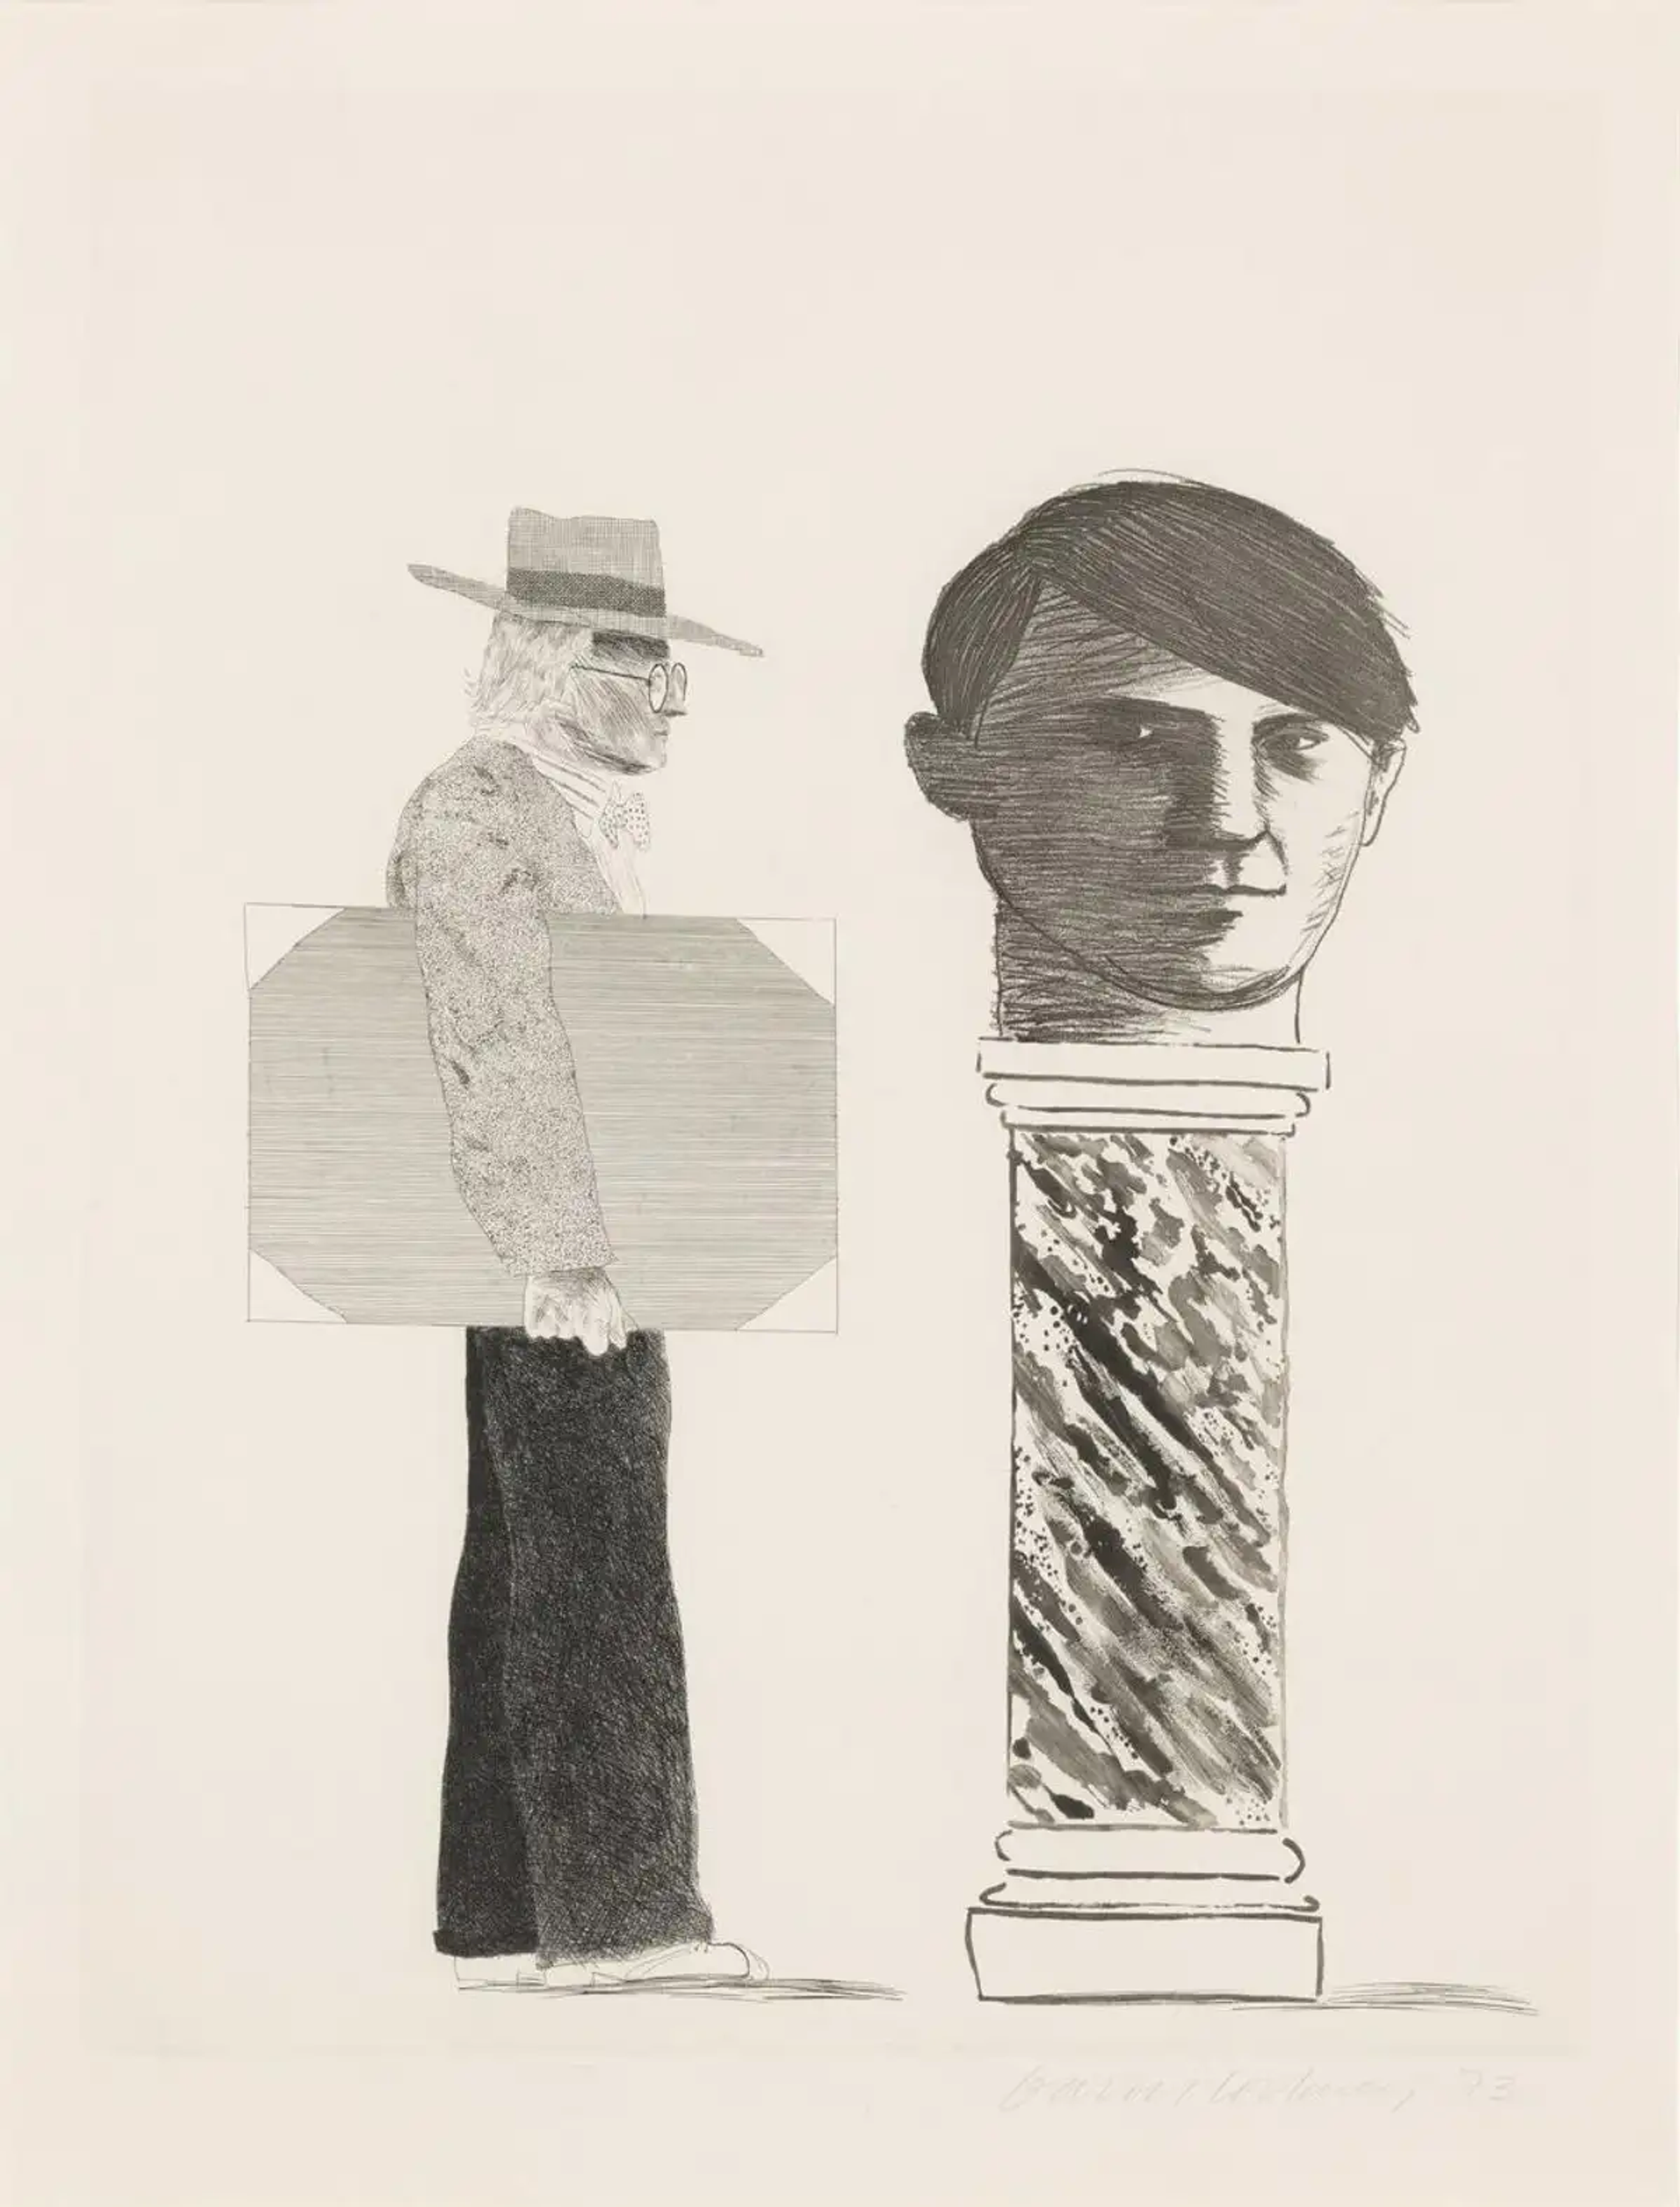 This signed print by much-loved British artist David Hockney is a tribute to Spanish artist Pablo Picasso, it depicts Hockney standing next to a bust of his idol, positioned on an ornate marble plinth.